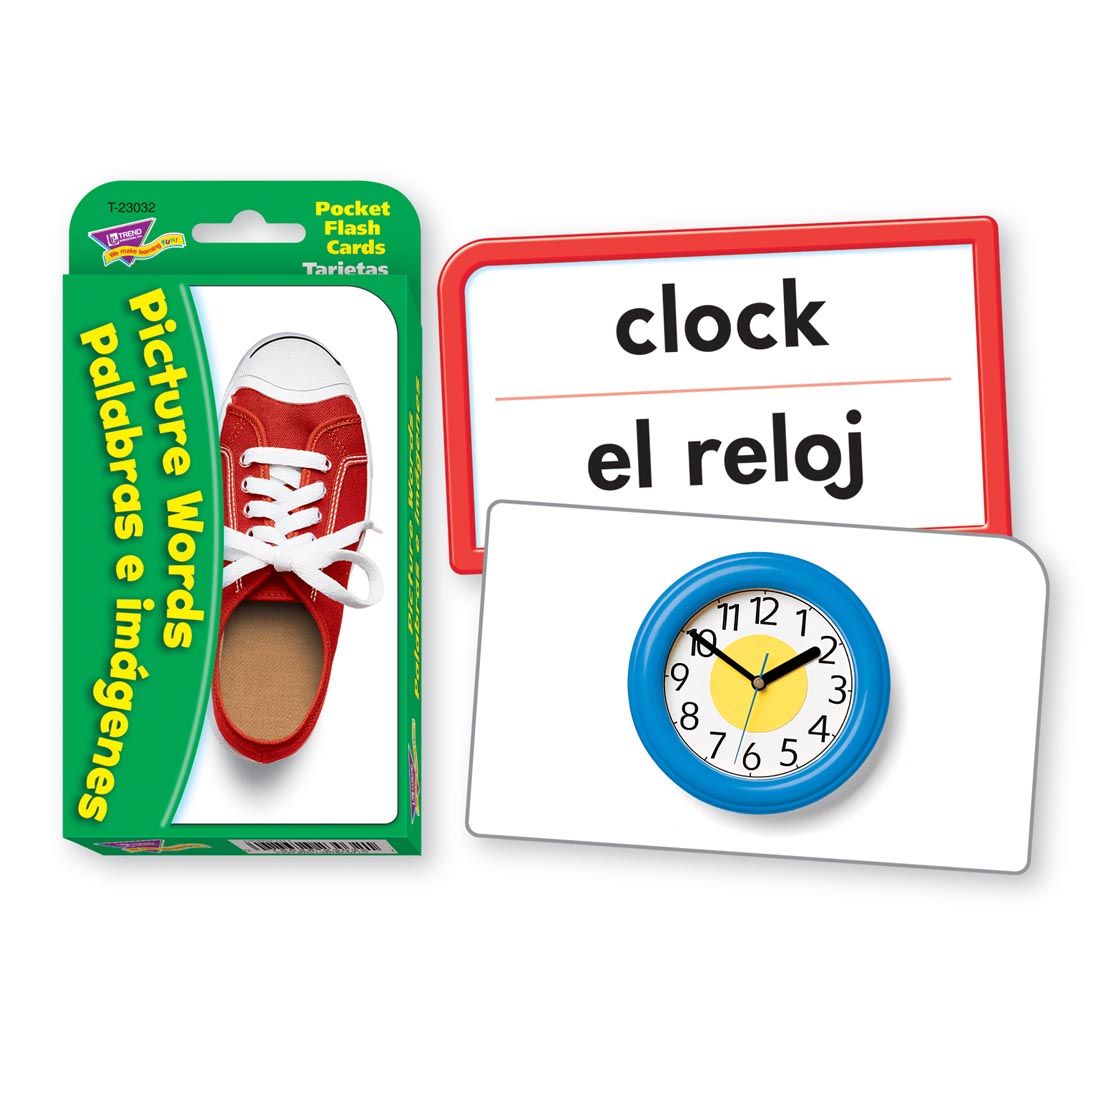 TREND Picture Words/Palabras E Imagenes Pocket Flash Cards